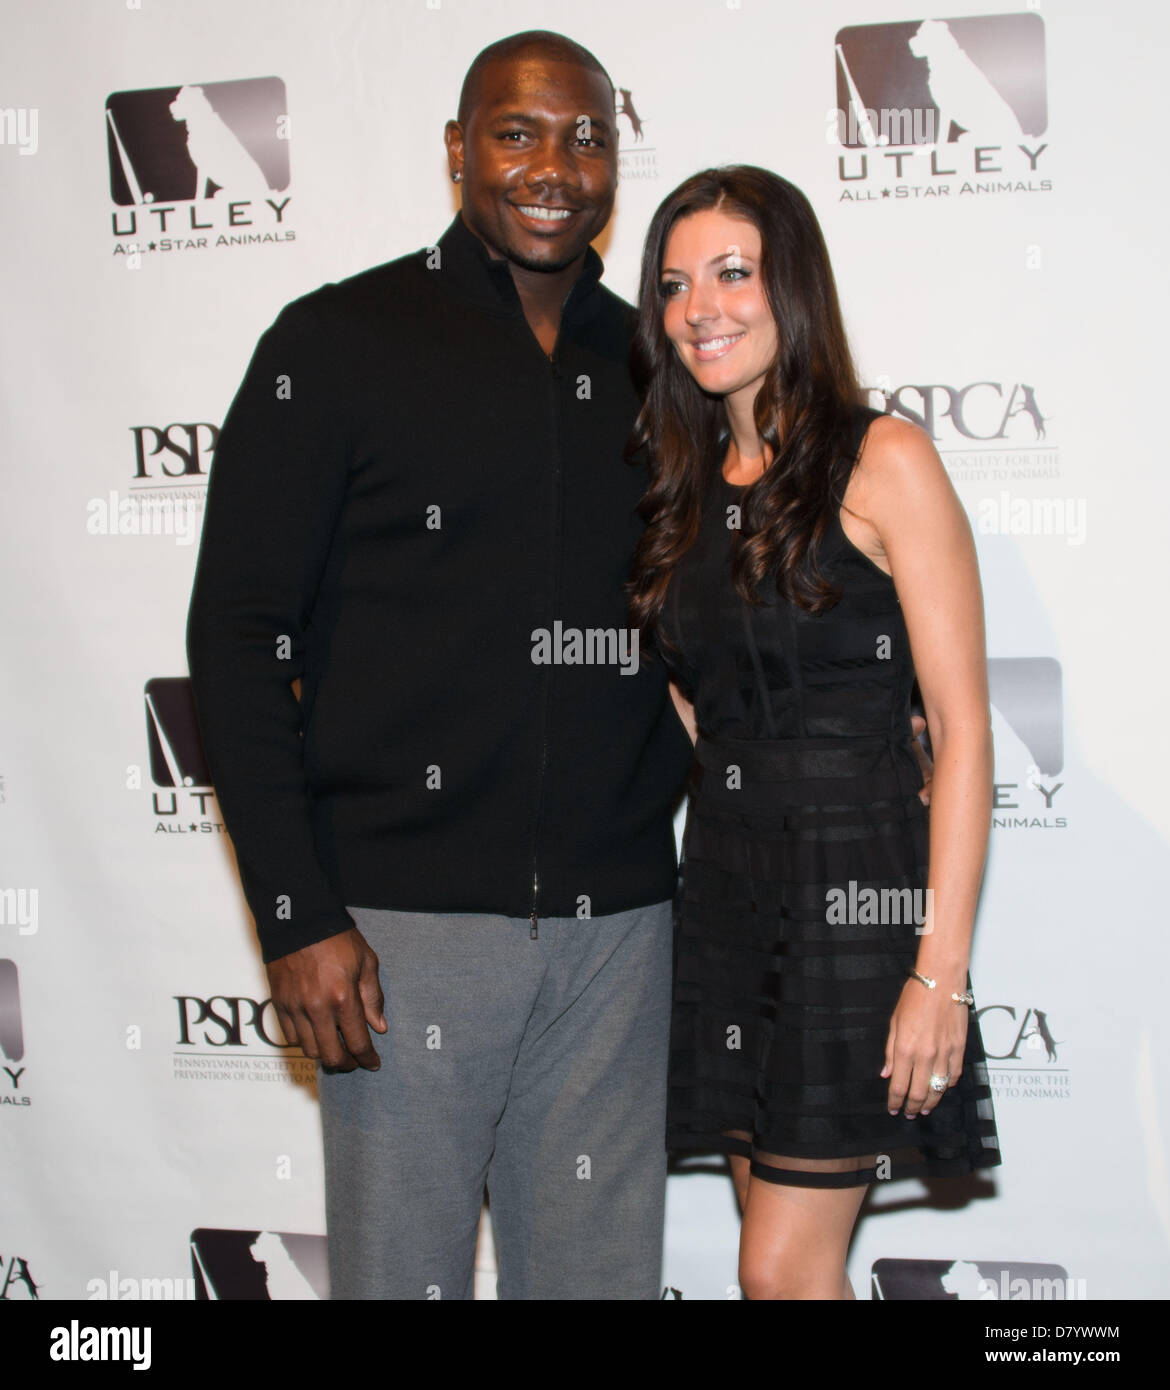 Philadelphia, Pennsylvania, U.S. May 15, 2013. Philadelphia Phillies' first  baseman, RYAN HOWARD and wife, KRYSTAL HOWARD, at the 6th Annual All-Star  Animal Casino Night The invitation only event raises funds to fight